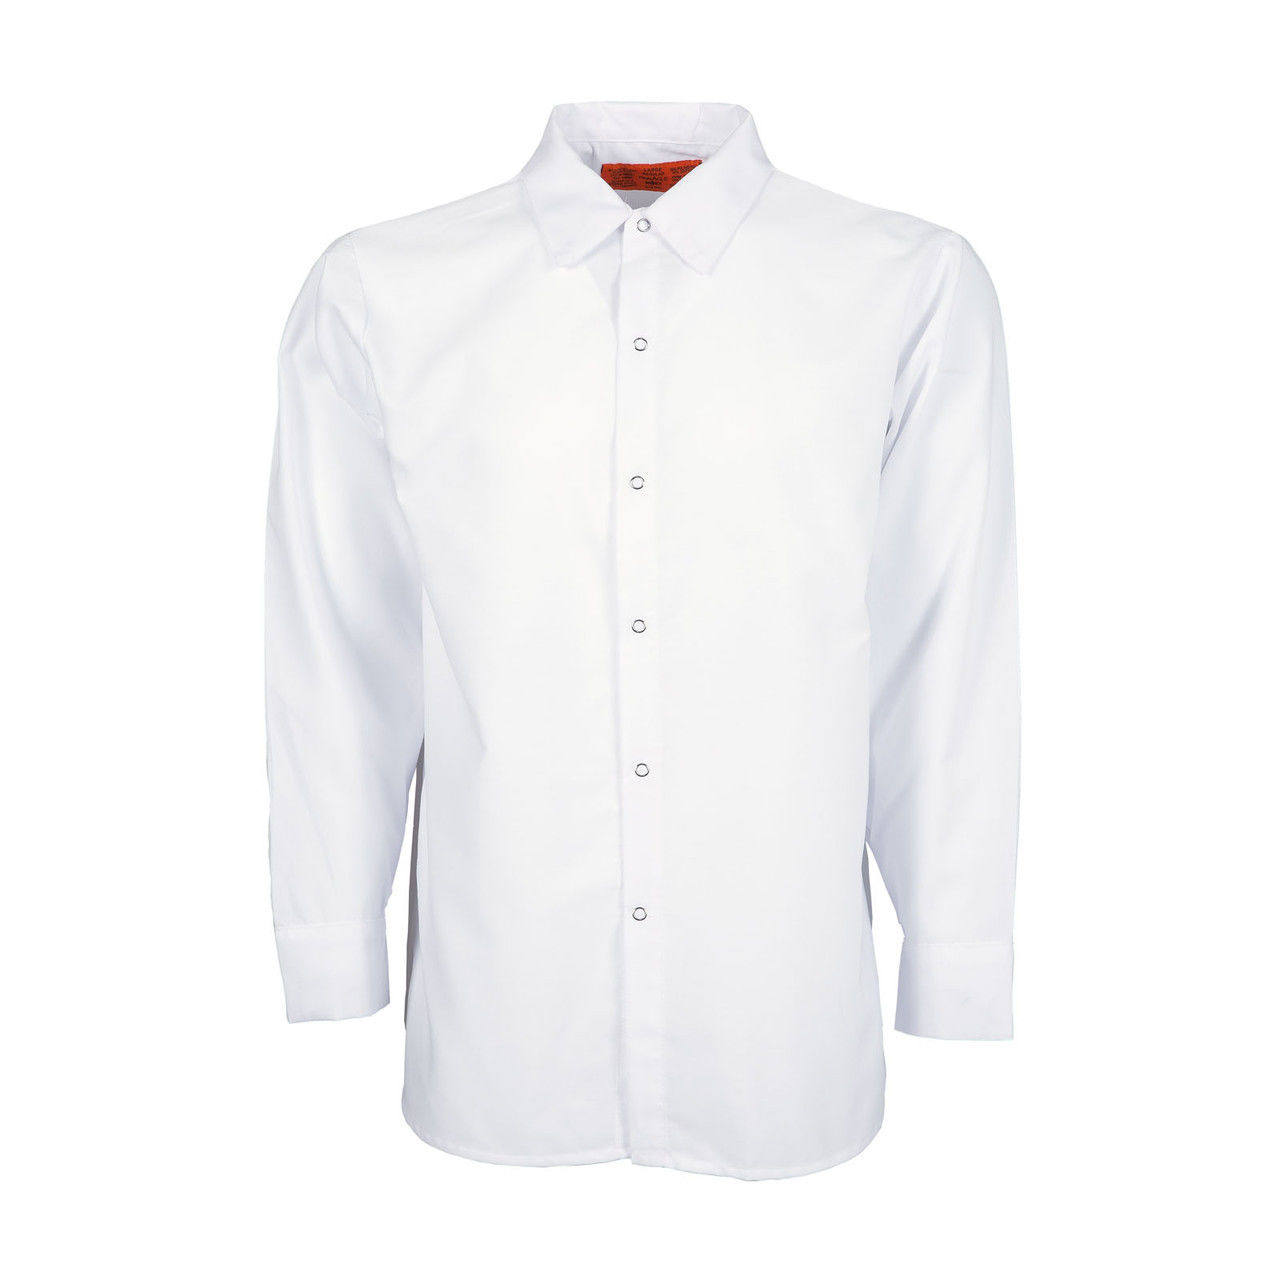 Does the white work shirts mens have button closures?